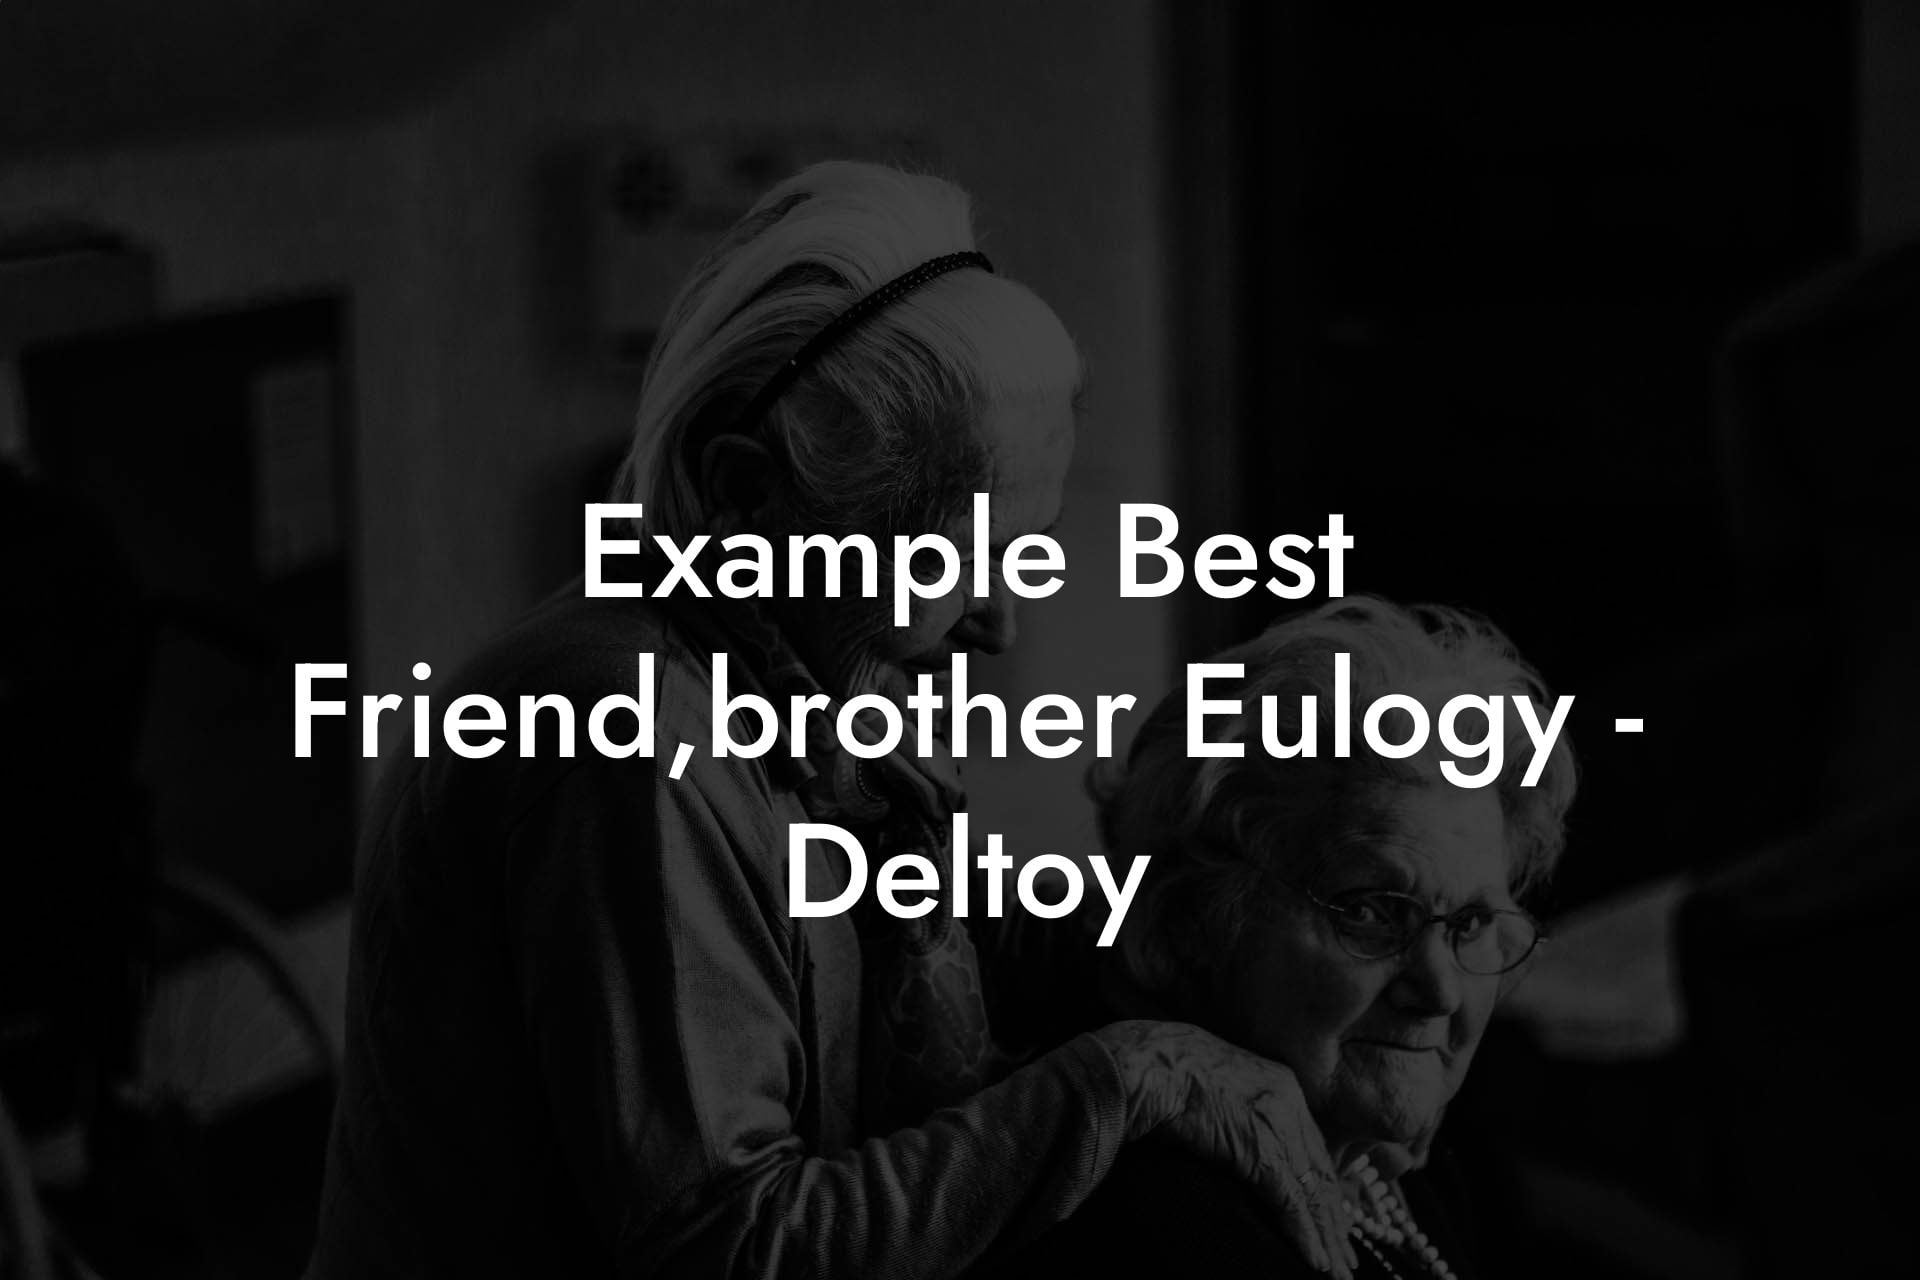 Example Best Friend,brother Eulogy   Deltoy